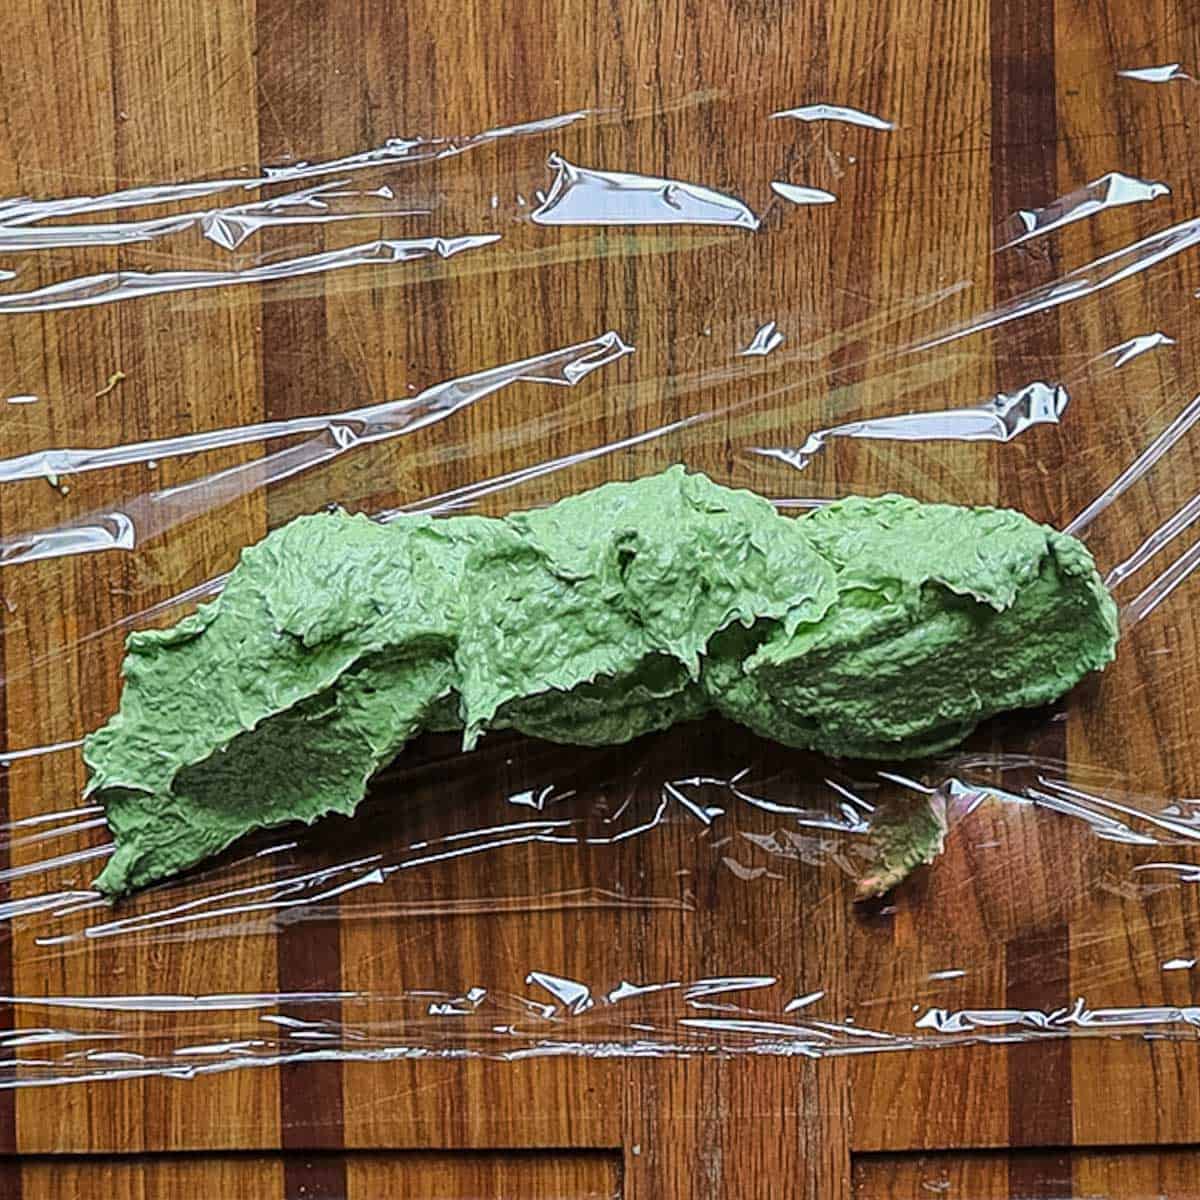 Green ramp butter being spread on cling film. 